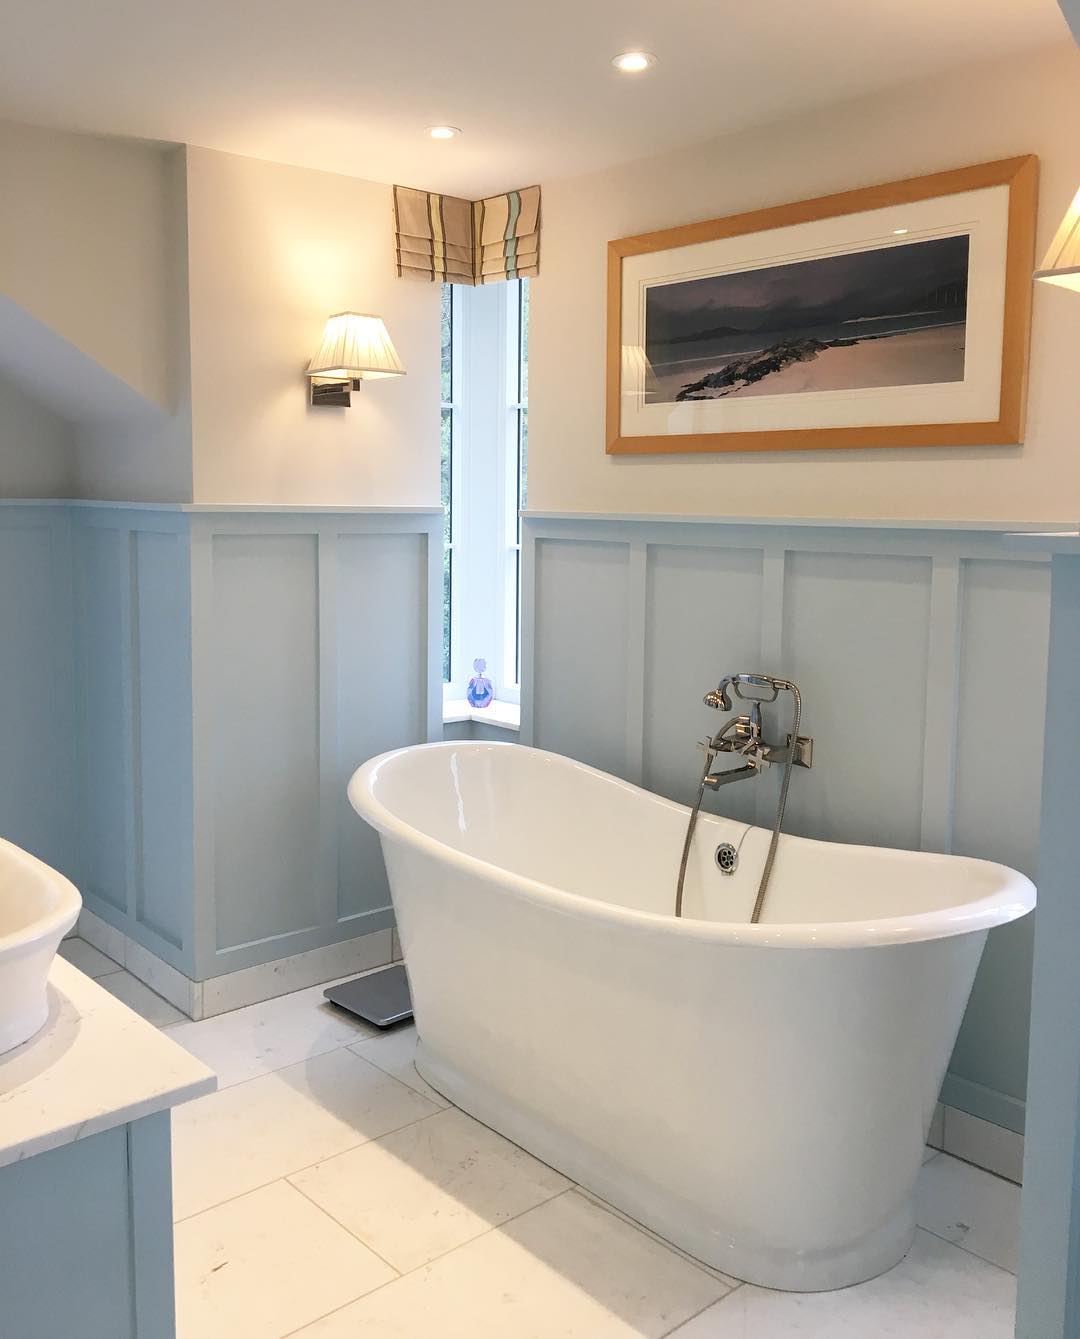 Bathroom with soaking tub. Photo by Instagram user @fineandcountrylakedistrict